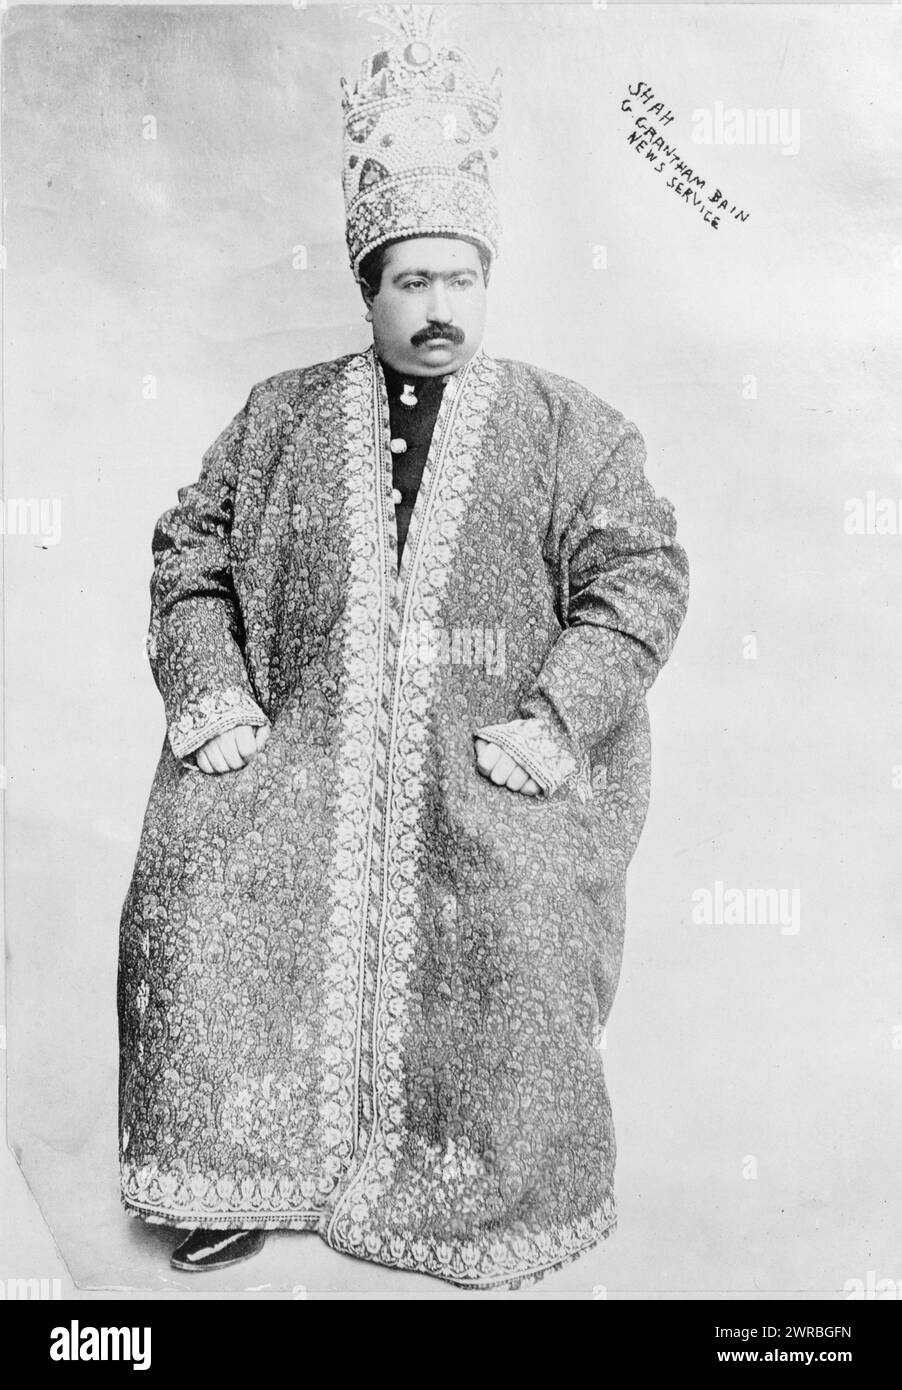 Shah of Persia, Mohammed Ali Mirzi, Dec. 19, 1907, Photograph shows the Shah of Persia, full-length portrait, seated, wearing an ornate robe and crown., 1907 Dec. 19., Muḥammad ʻAlī, Shah of Iran, 1872-1925, Photographic prints, 1900-1910., Portrait photographs, 1900-1910, Photographic prints, 1900-1910, 1 photographic print Stock Photo